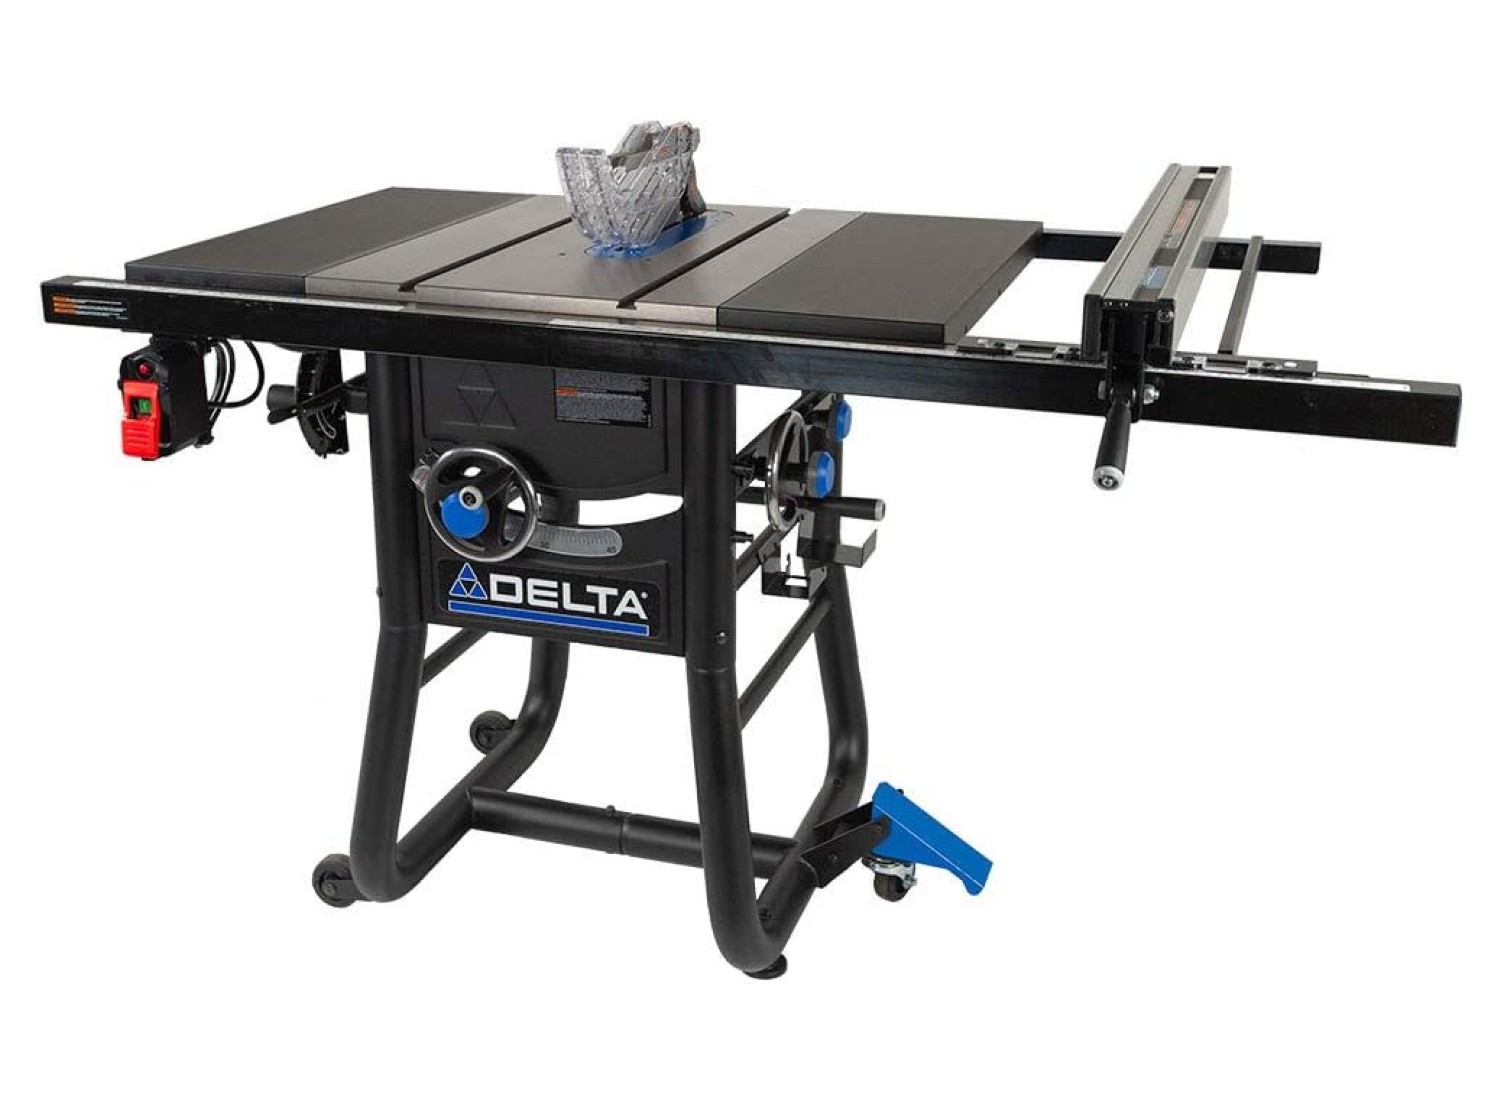 Black Delta cabinet table saw with that prominently reads 